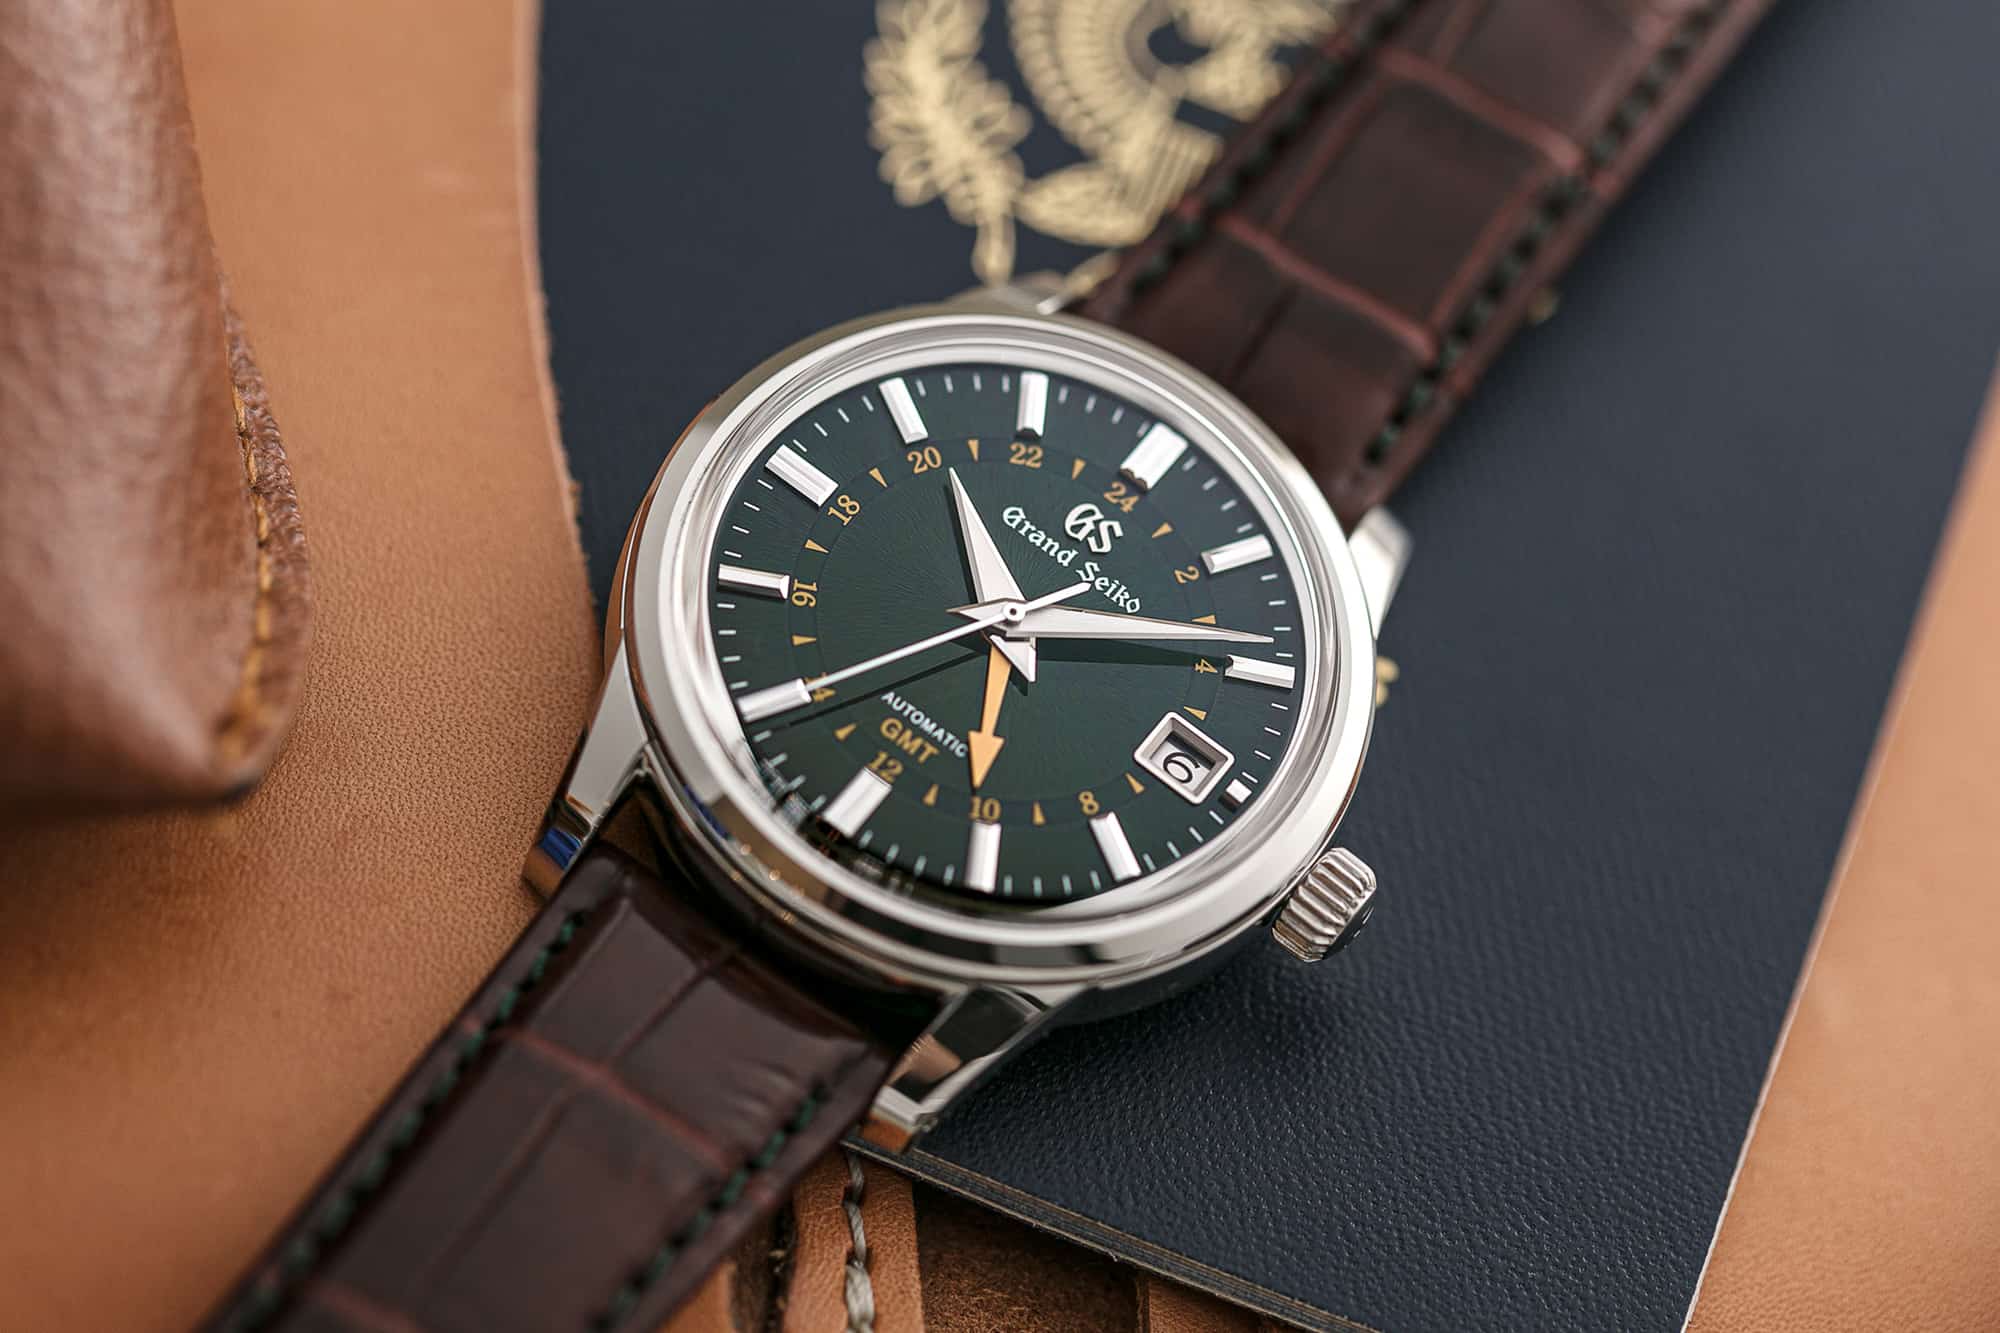 Grand Seiko teams with Watches of Switzerland for their Latest Mt. Iwate  Dialed GMT - Worn & Wound